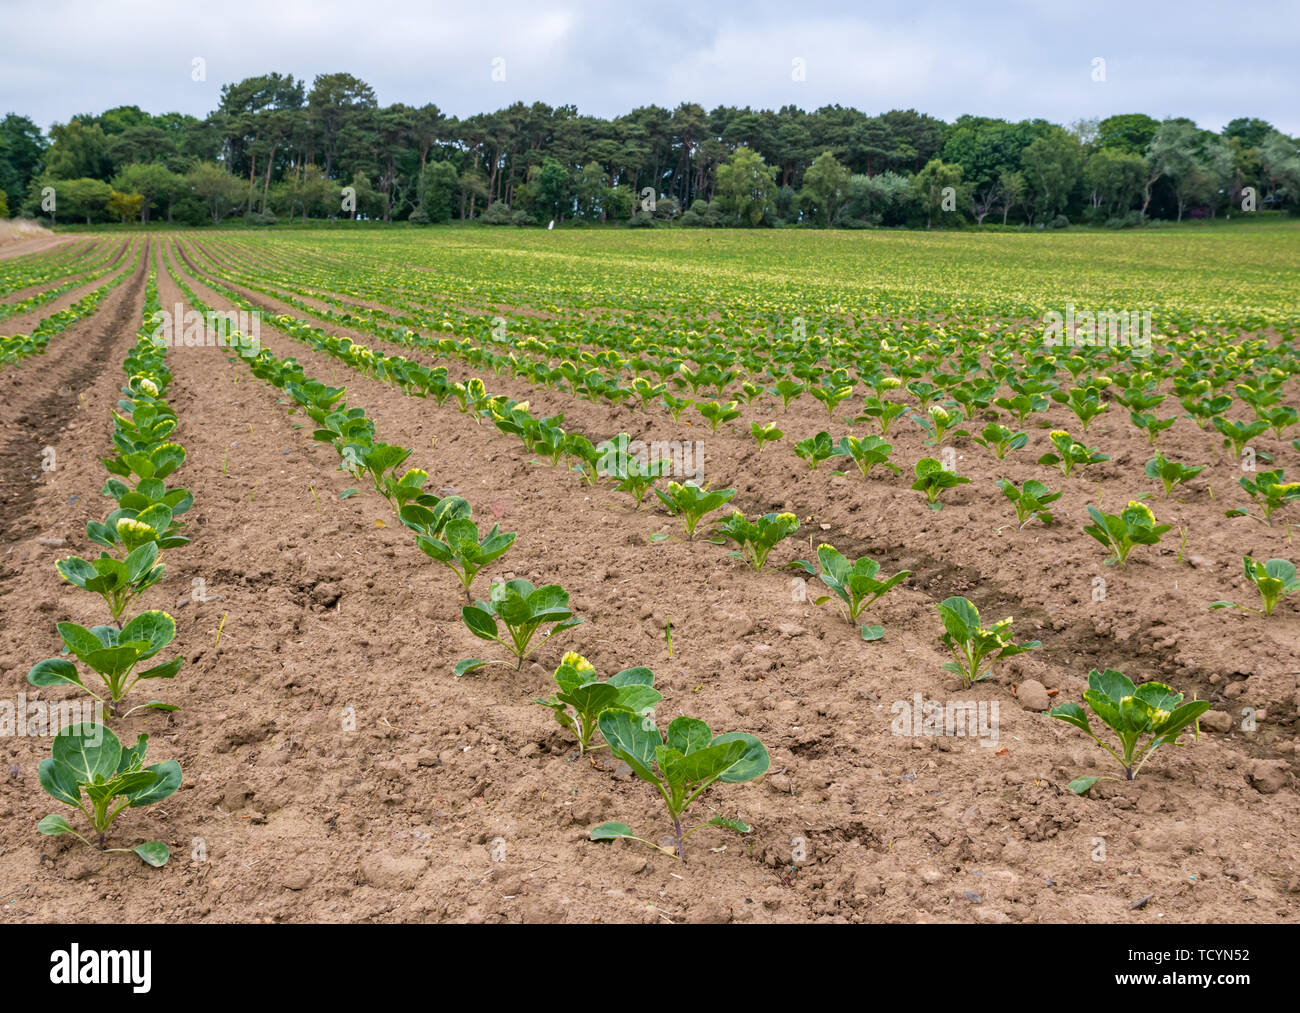 Rows of newly planted seedlings in agricultural field, East Lothian, Scotland, UK Stock Photo